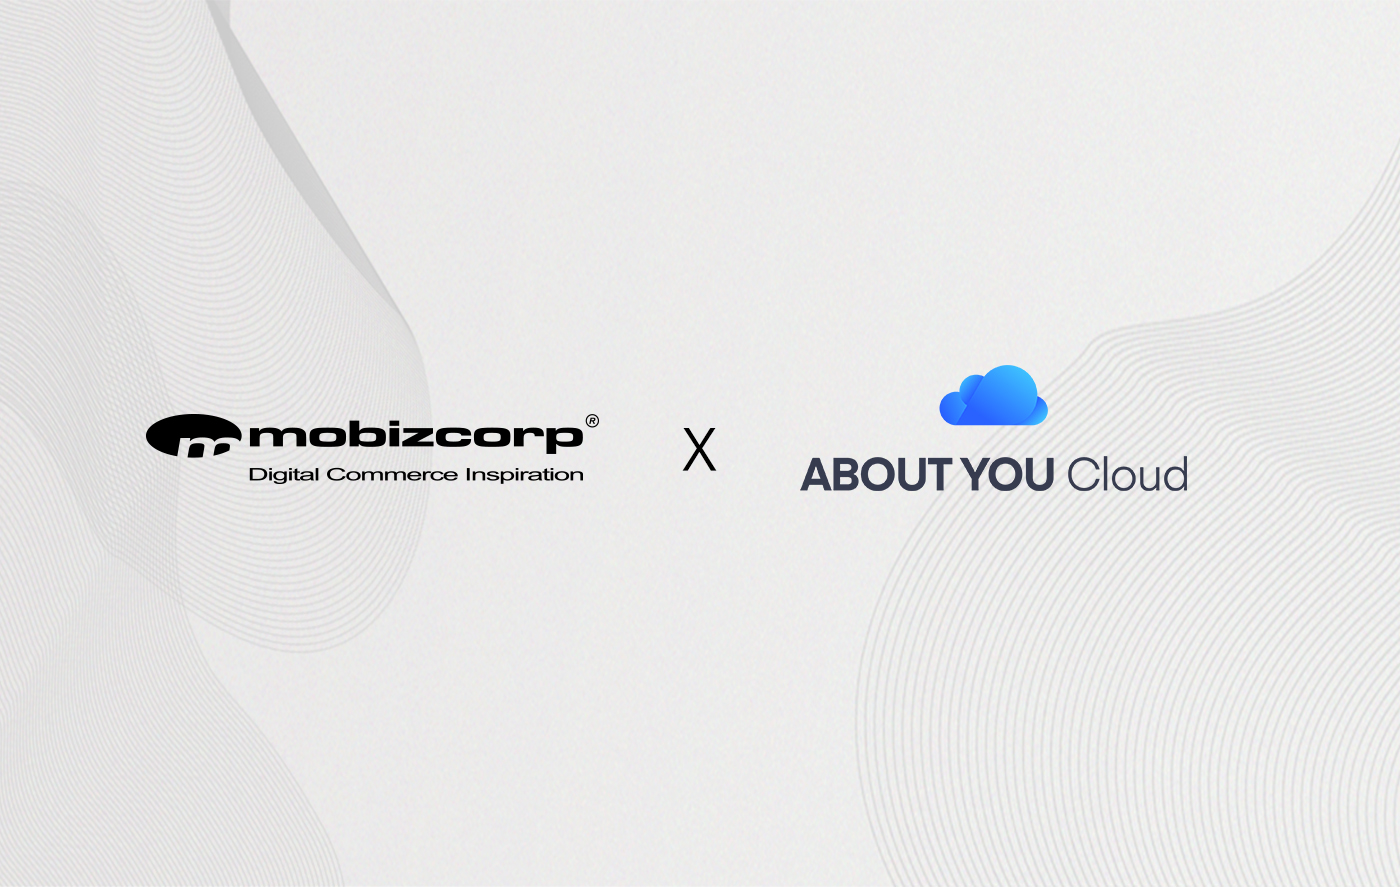 Mobizcorp and About You Cloud announce strategic partnership